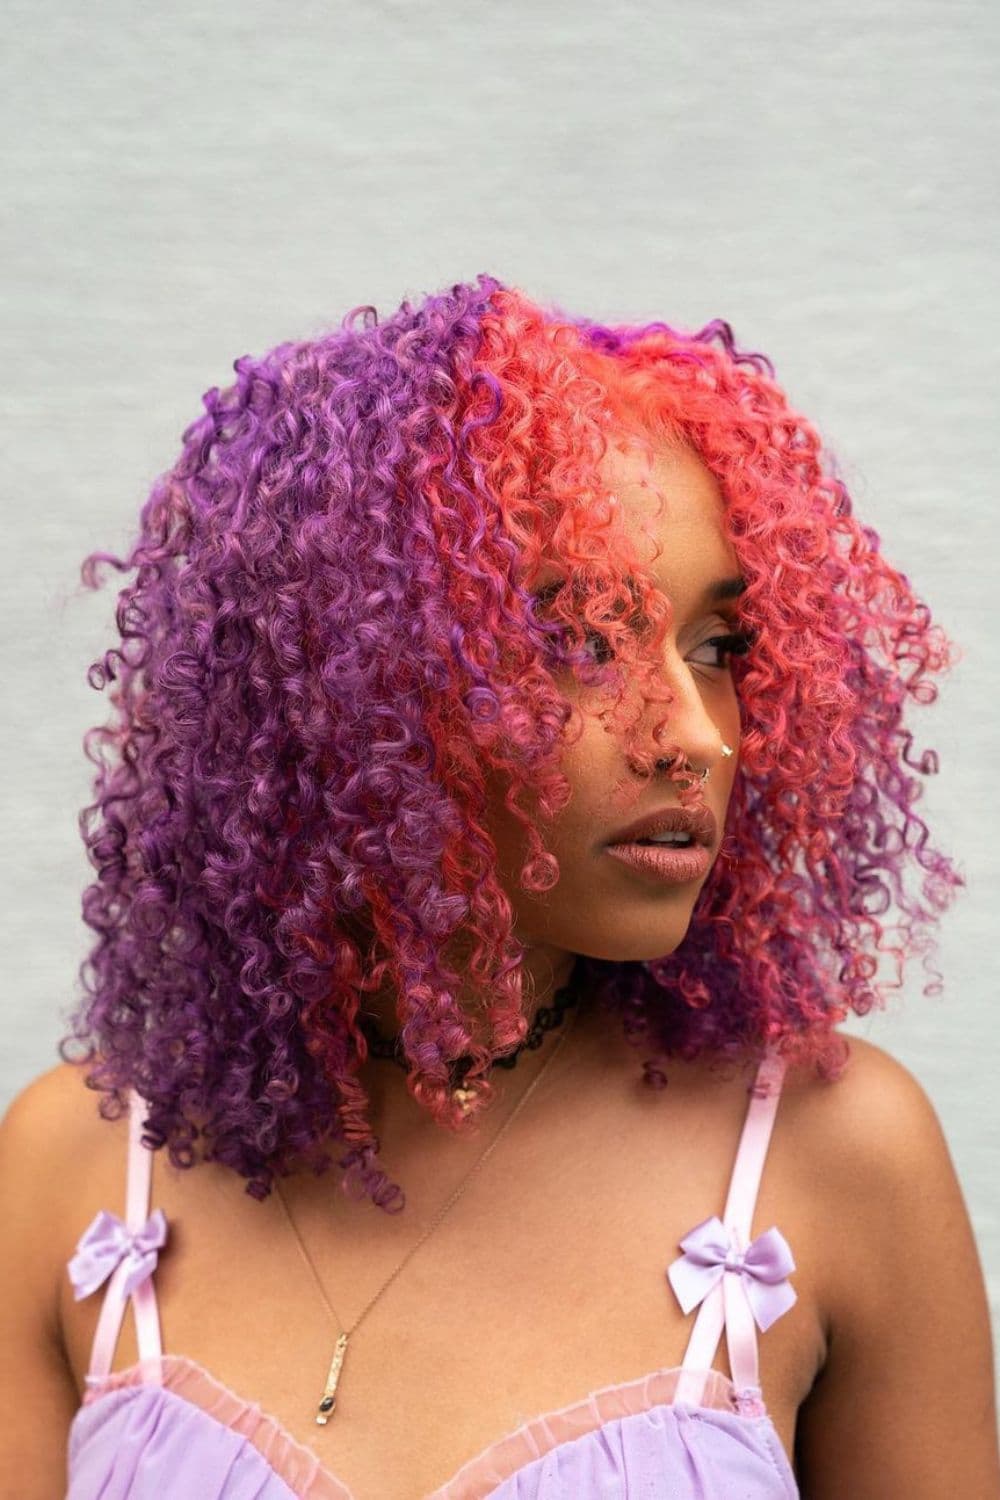 A woman with short curly hair with pink money pieces on lilac purple hair.